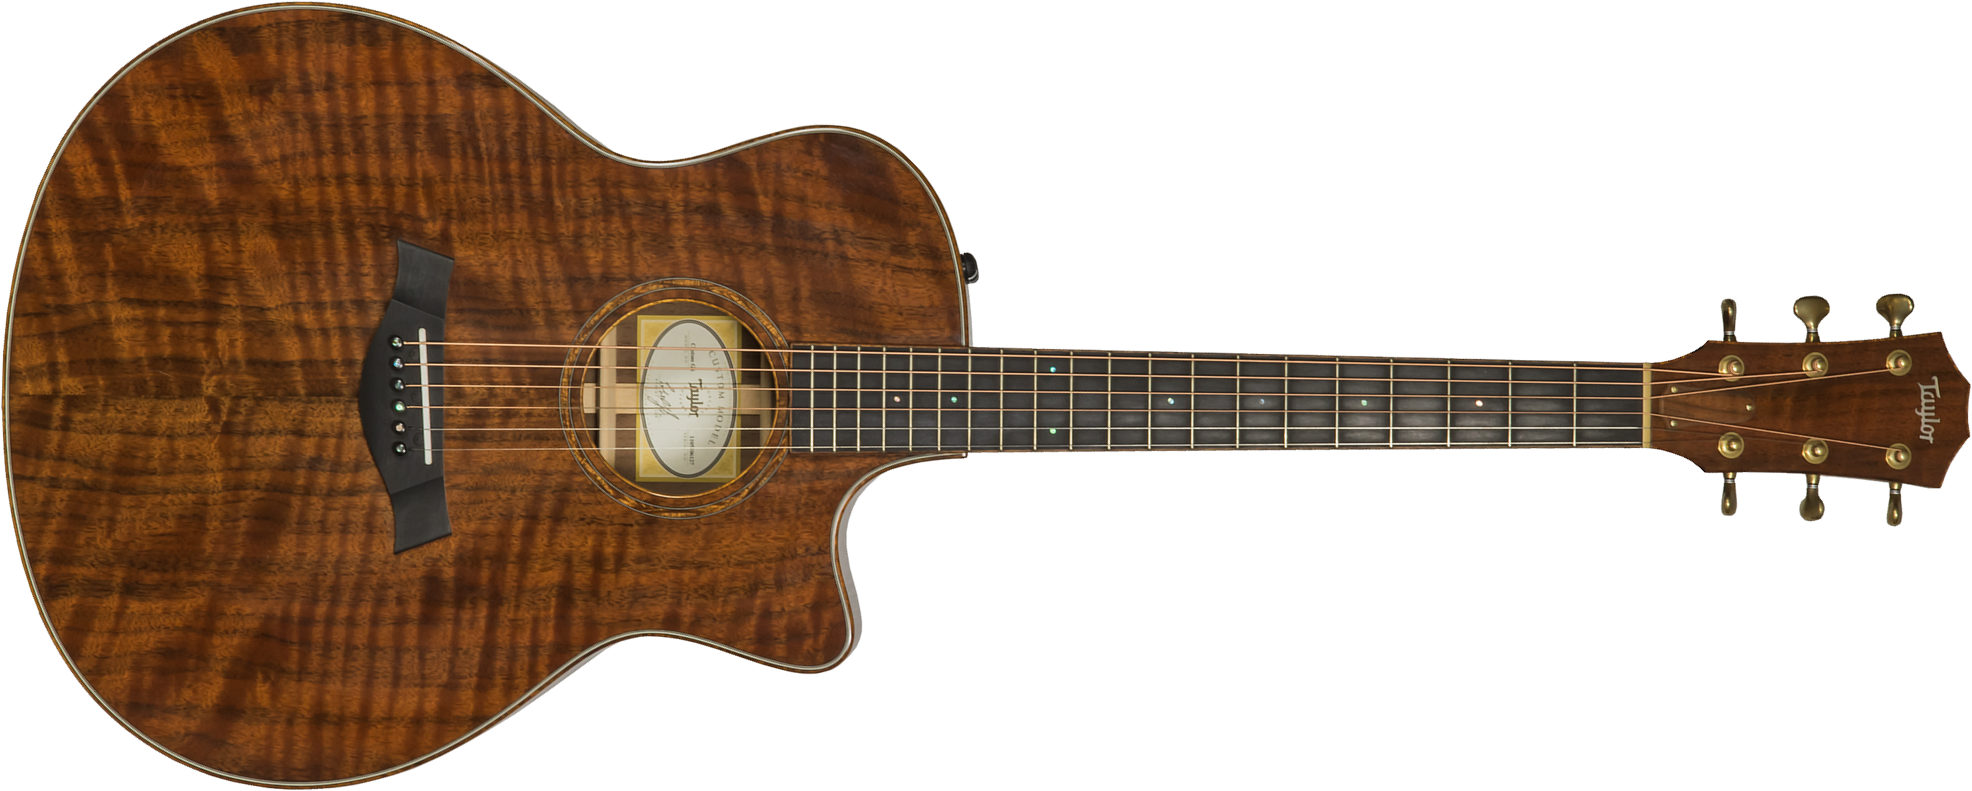 Taylor Gs-e Custom Grand Symphony Cw Tout Noyer Es2 #b9675 - Natural - Westerngitaar & electro - Main picture